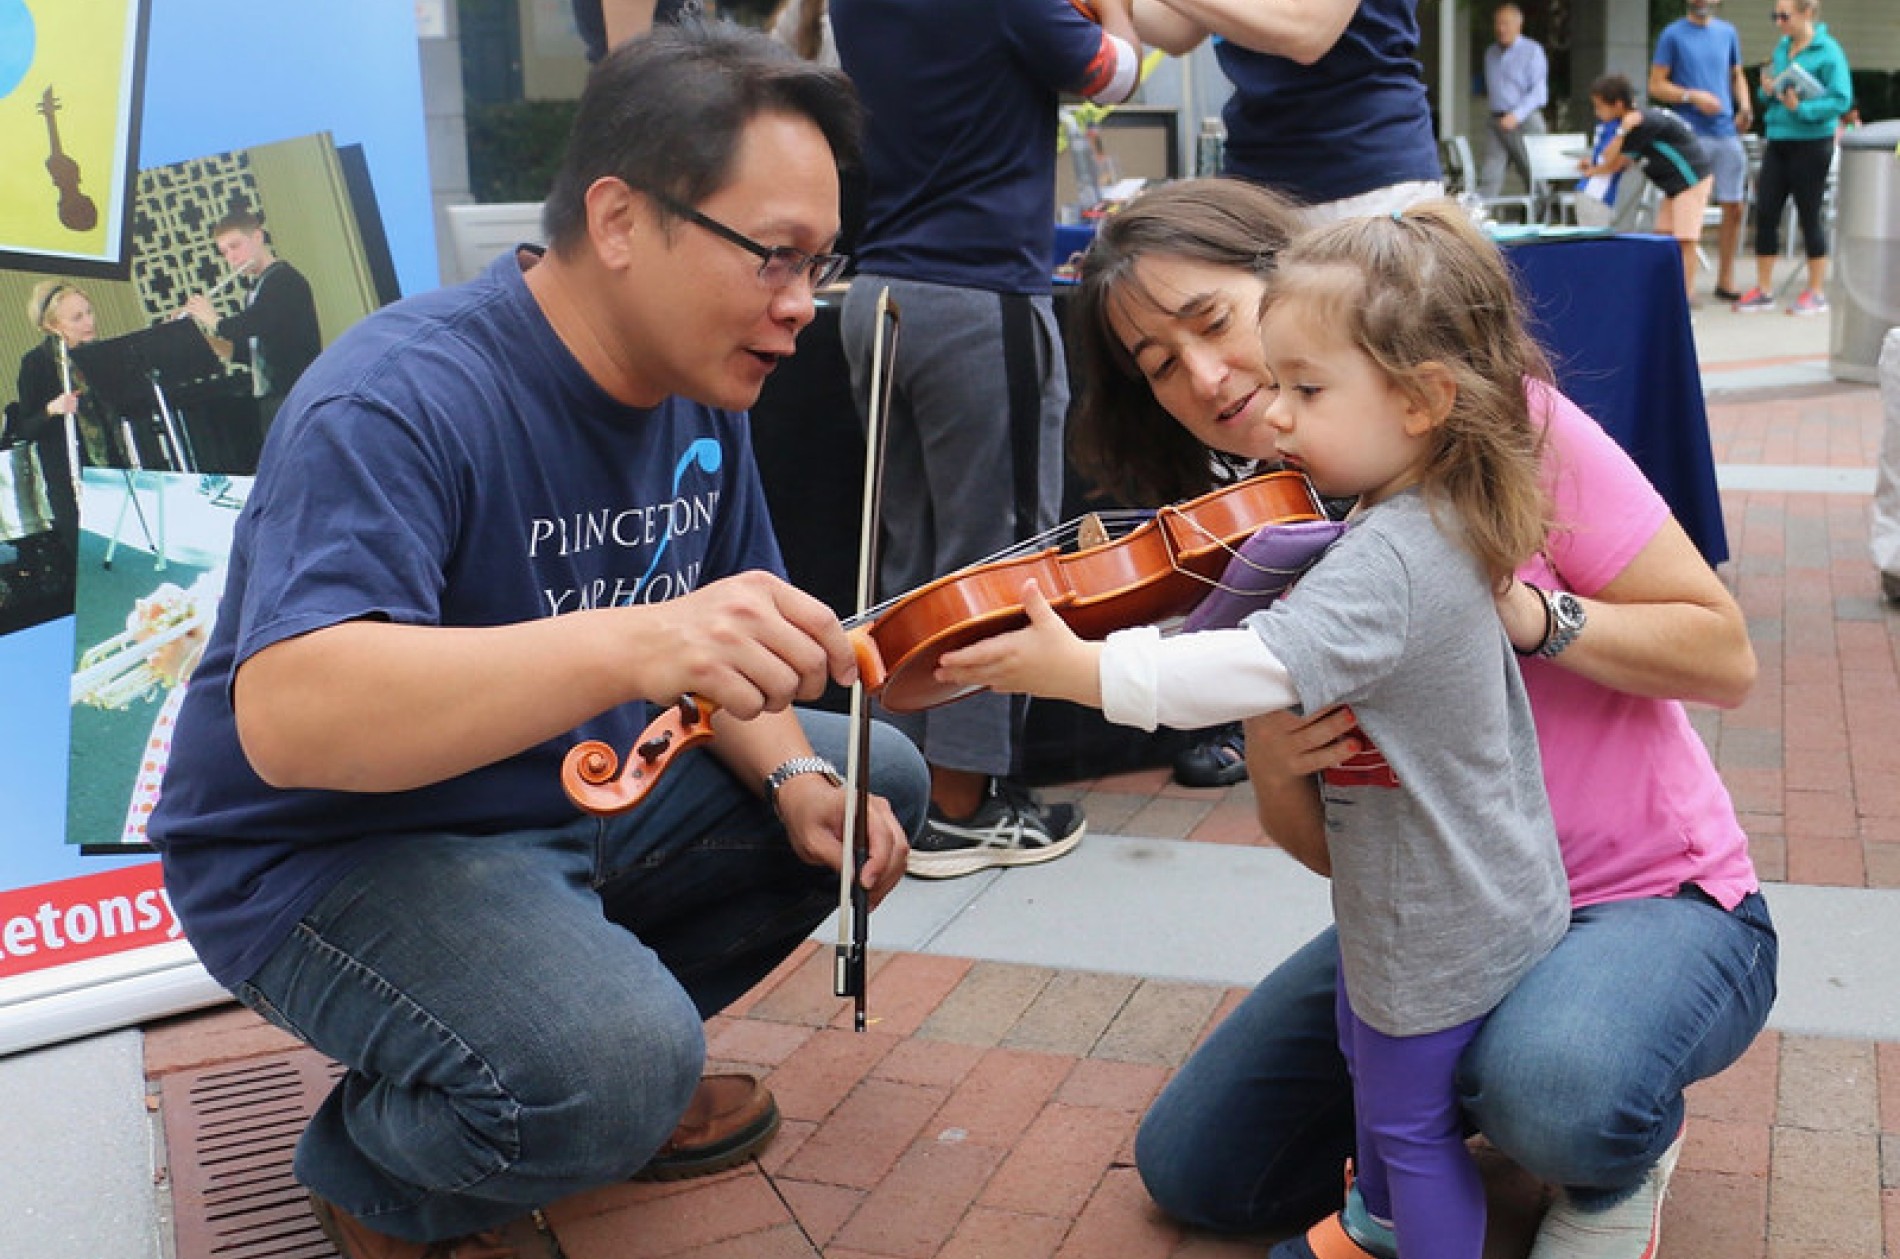 Musician squatting down to help small child with accompanying parent play the violin at an outdoor event.